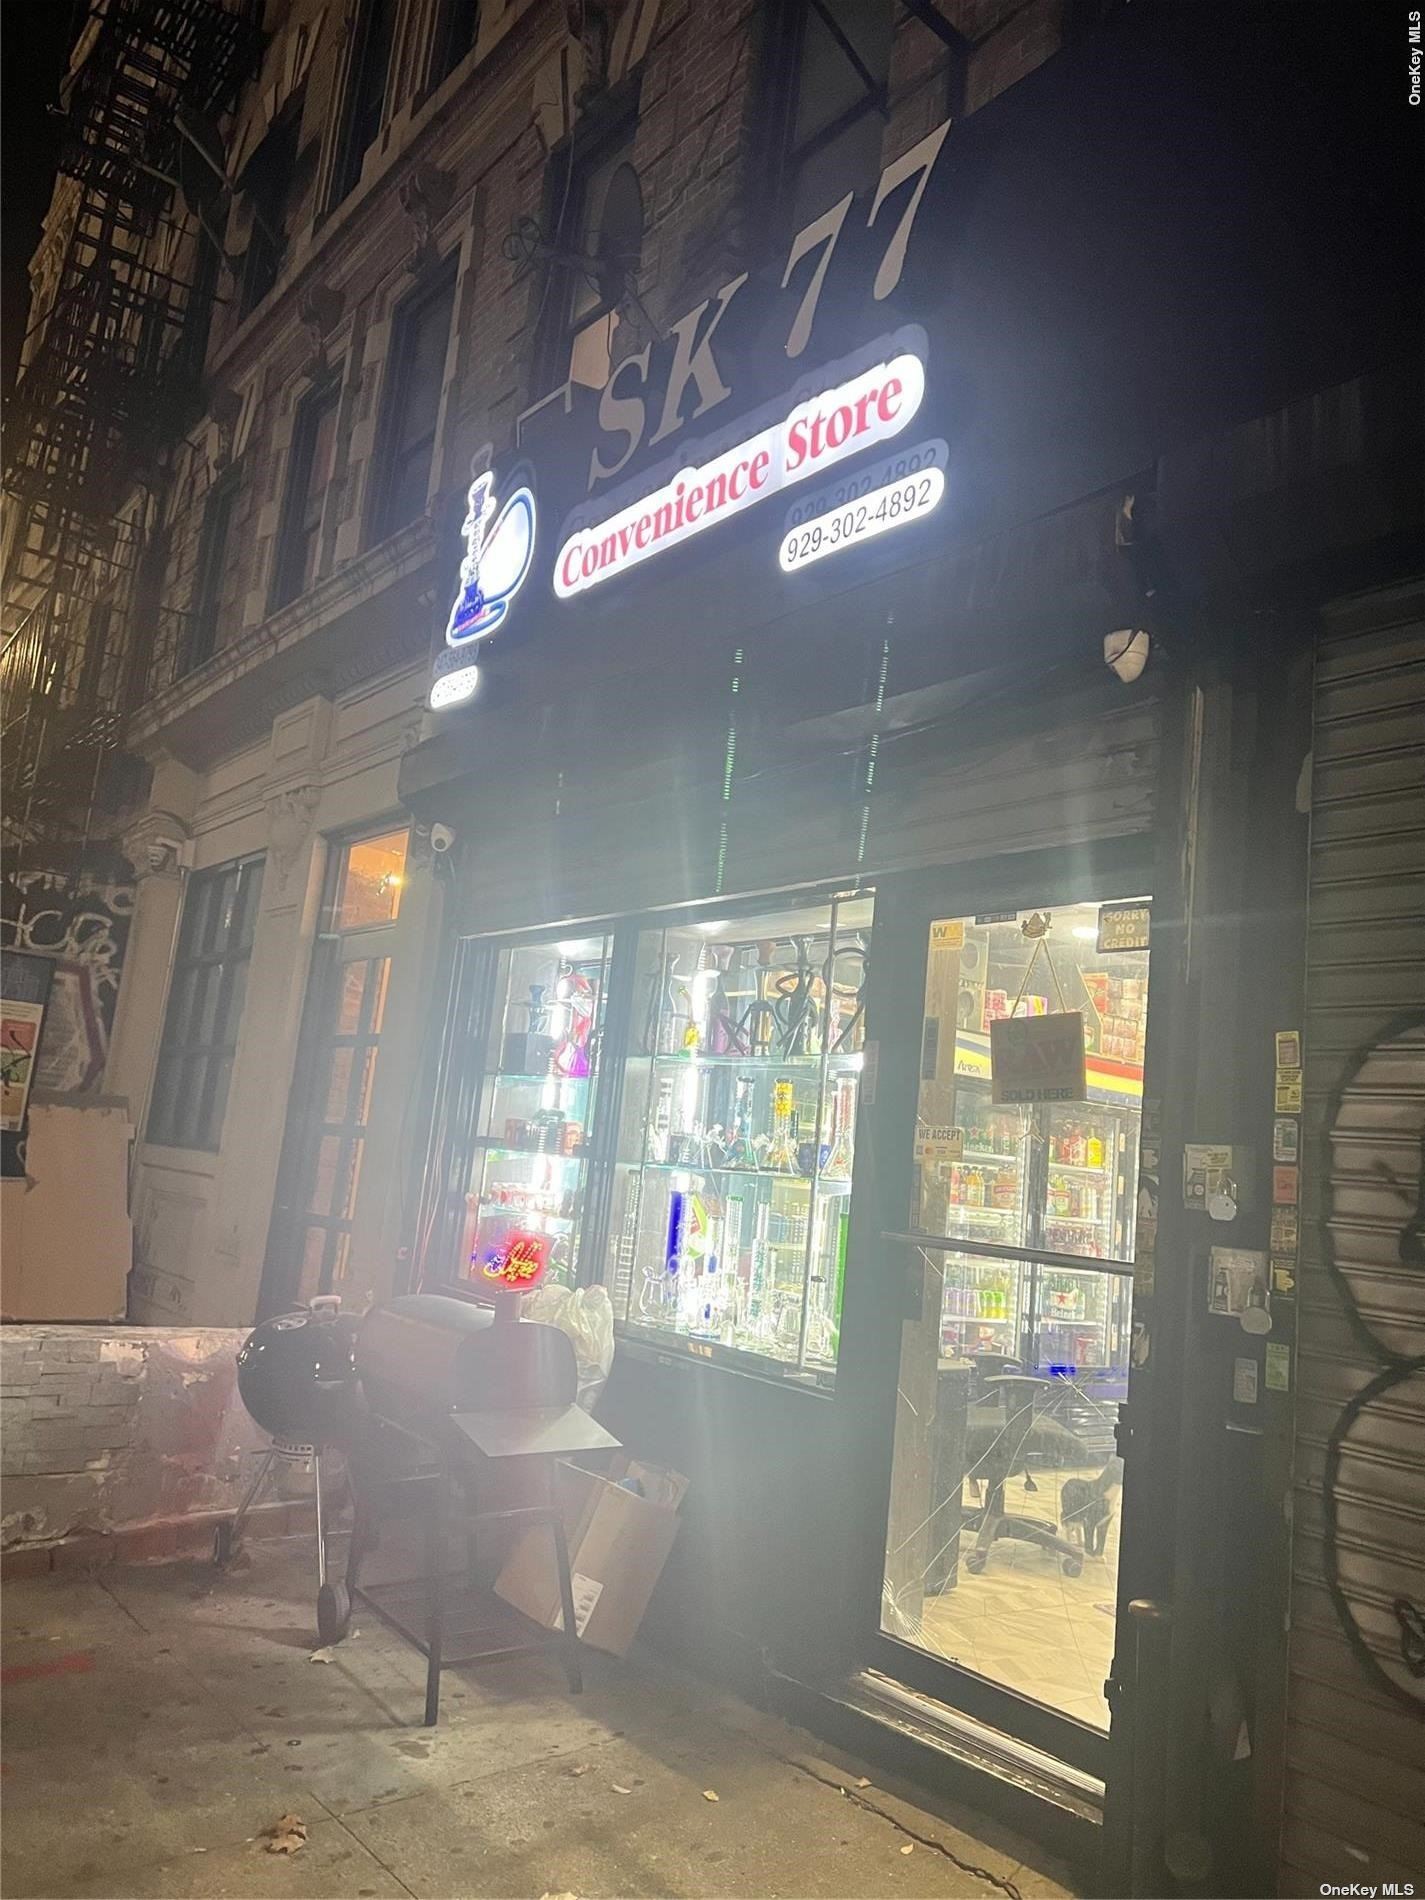 Business Opportunity in Williamsburg - Varet  Brooklyn, NY 11206